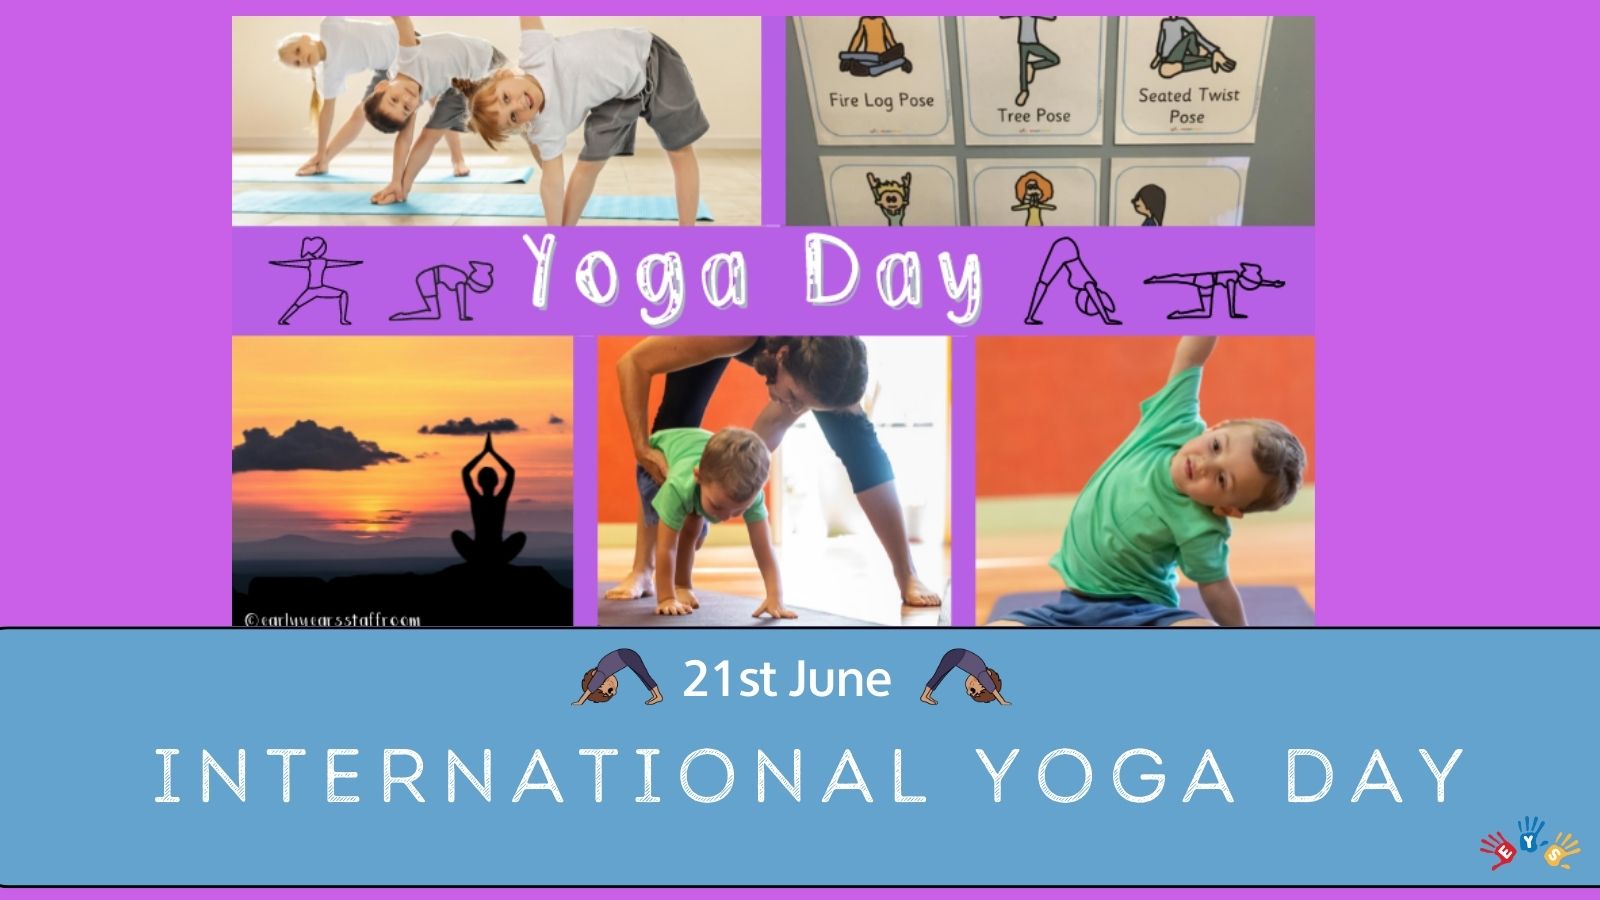 Twitter flexes creative muscles to celebrate International Yoga Day 2019